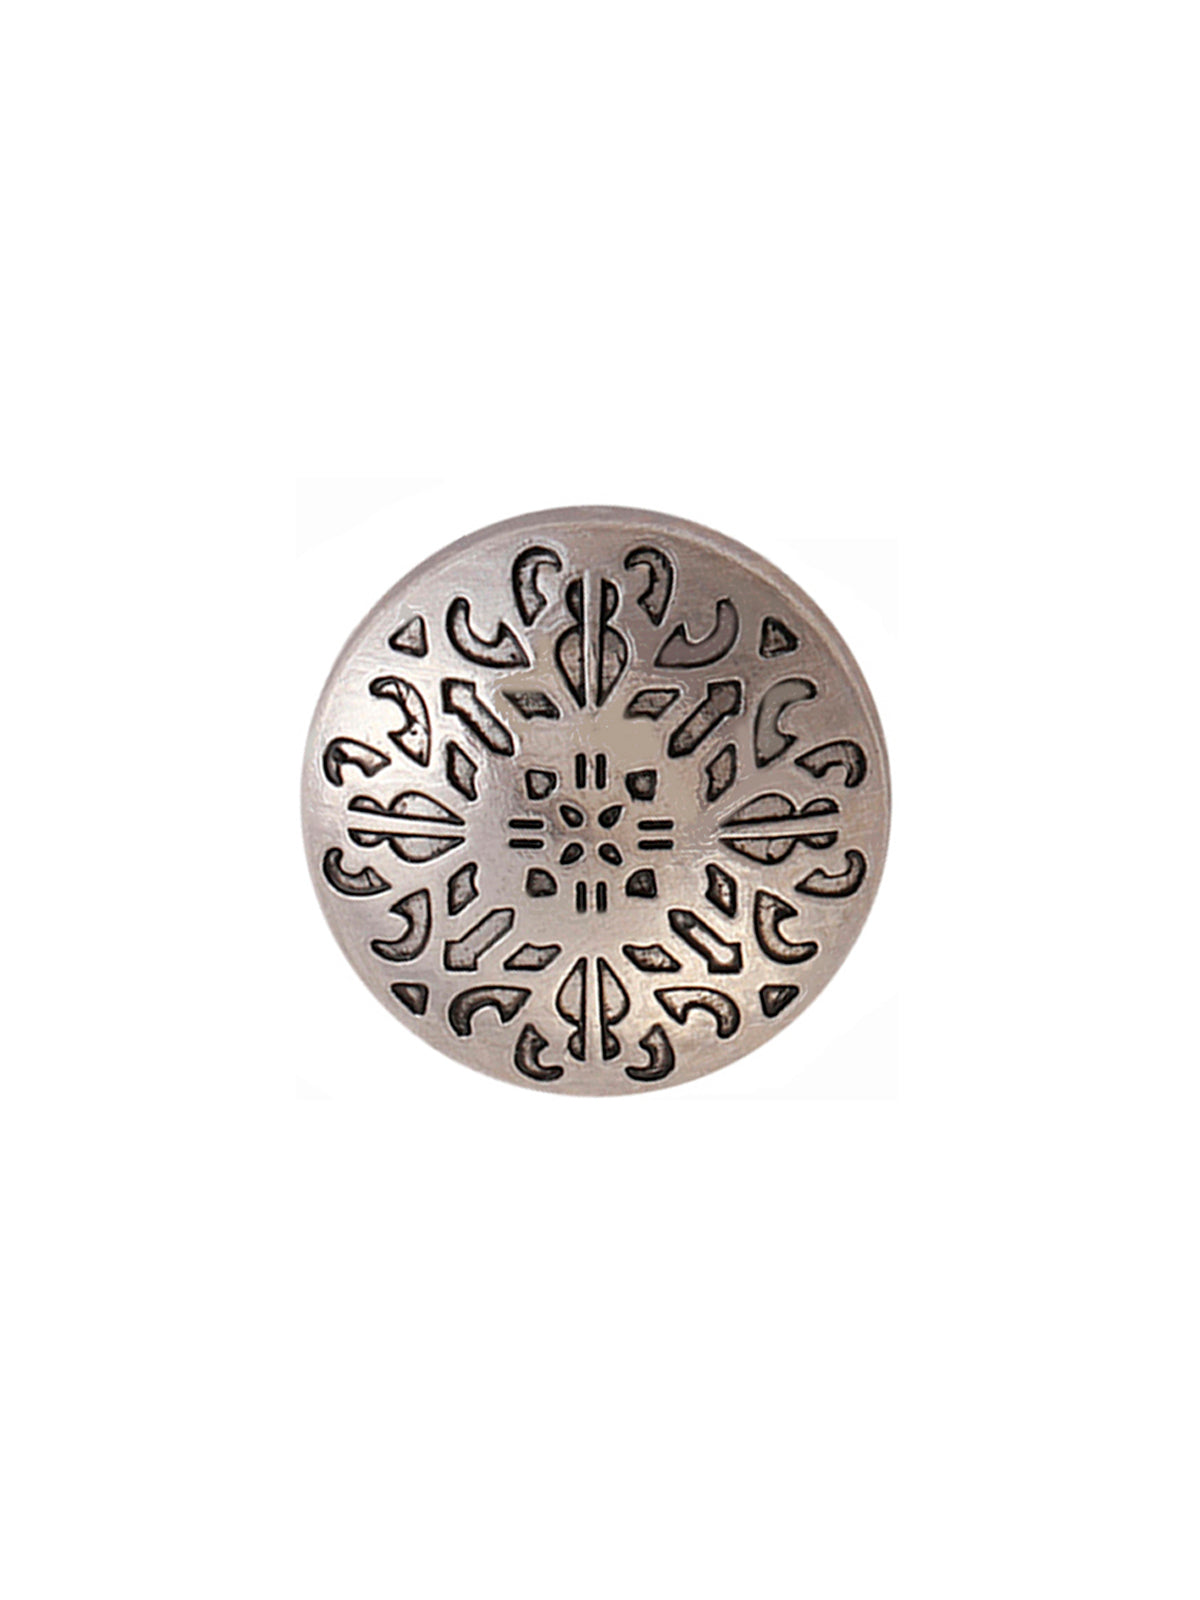 Antique Silver Finish Round Shape Engraved Design Dome Button